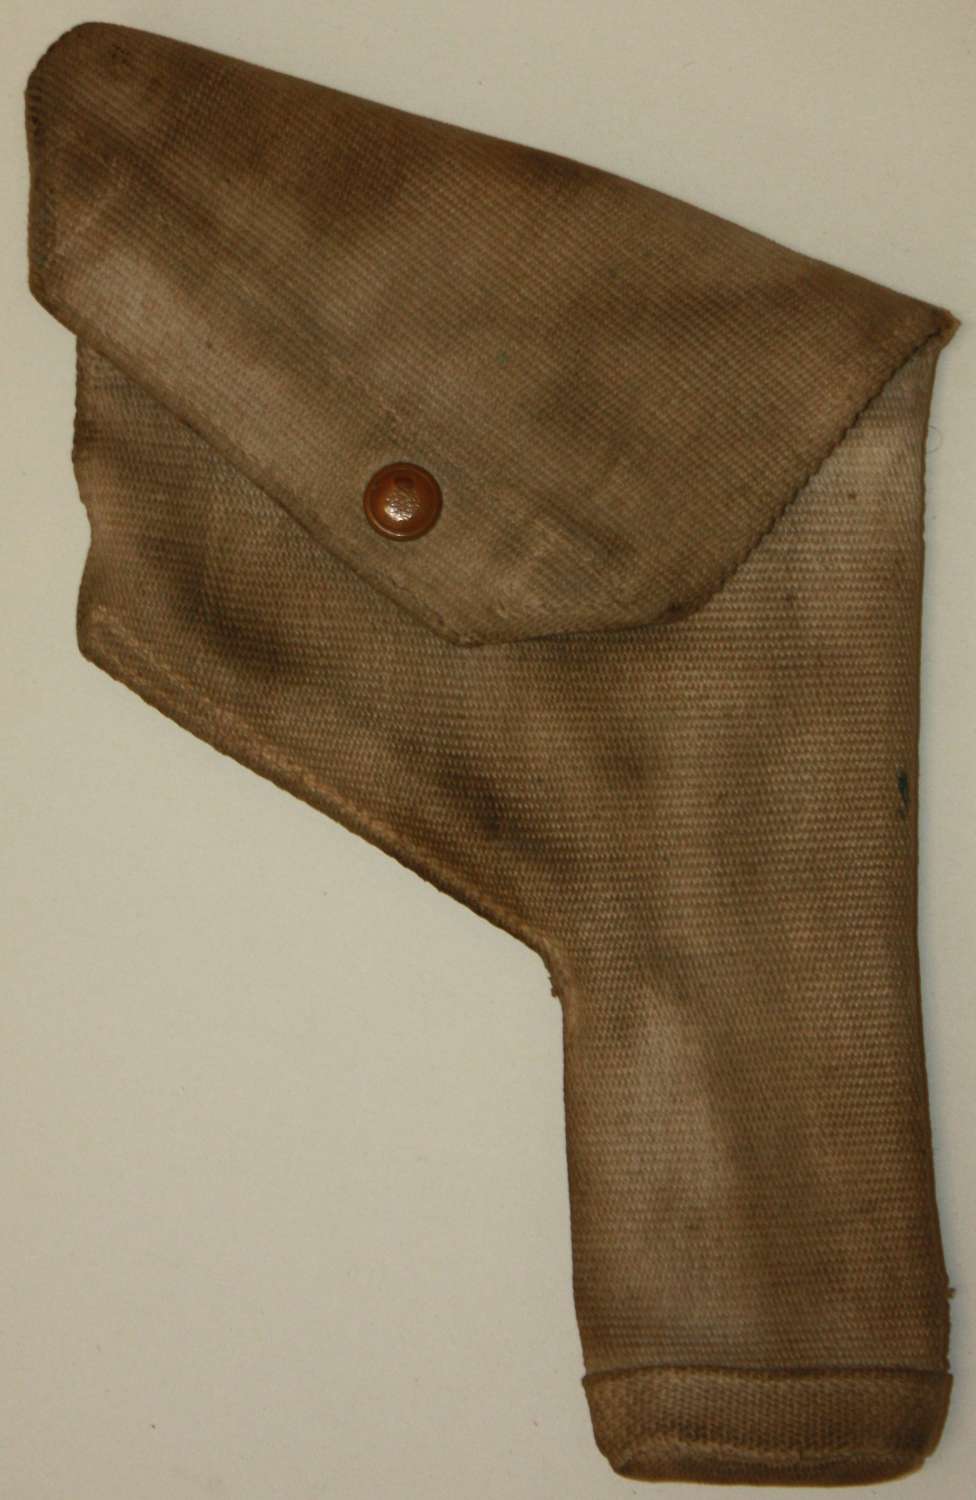 A 1940 DATED NAVY 1919 PATTERN WEBBING HOLSTER